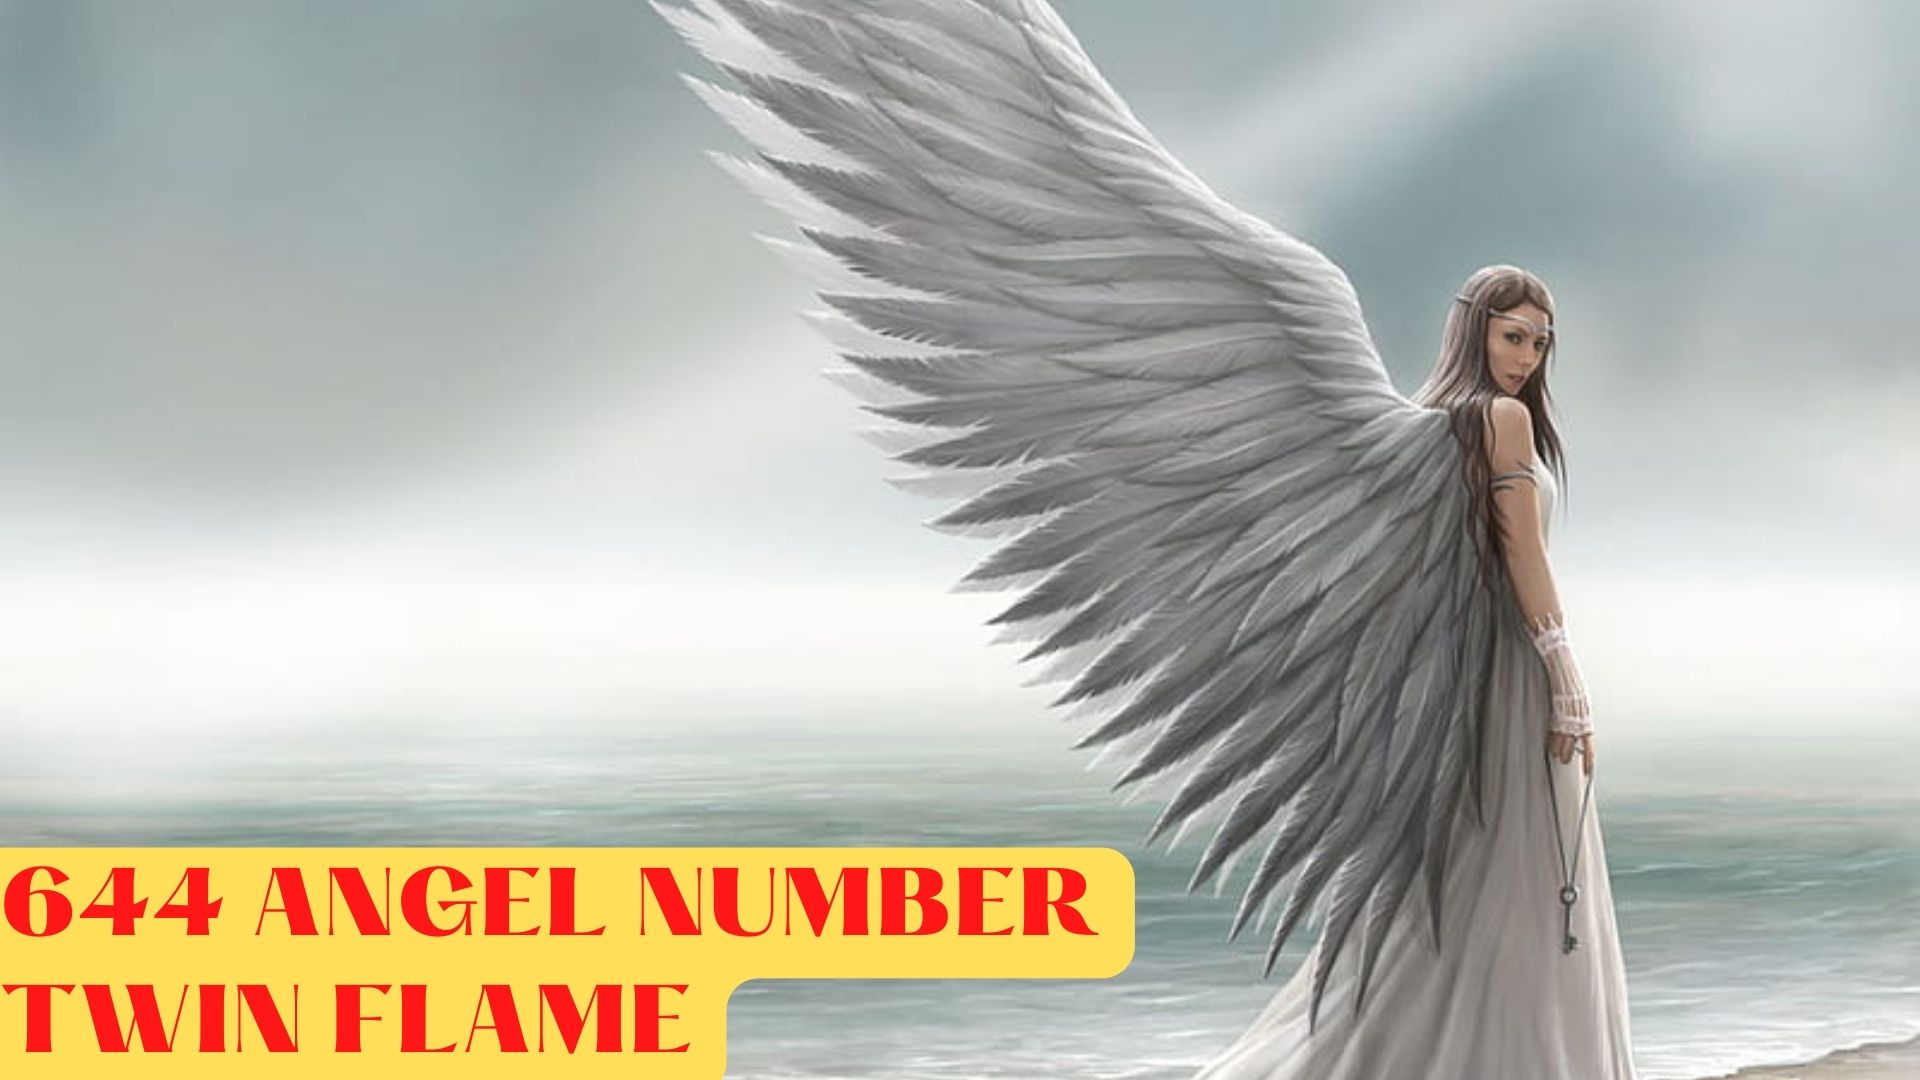 644 Angel Number Twin Flame - A Sign Of Hope And Warning